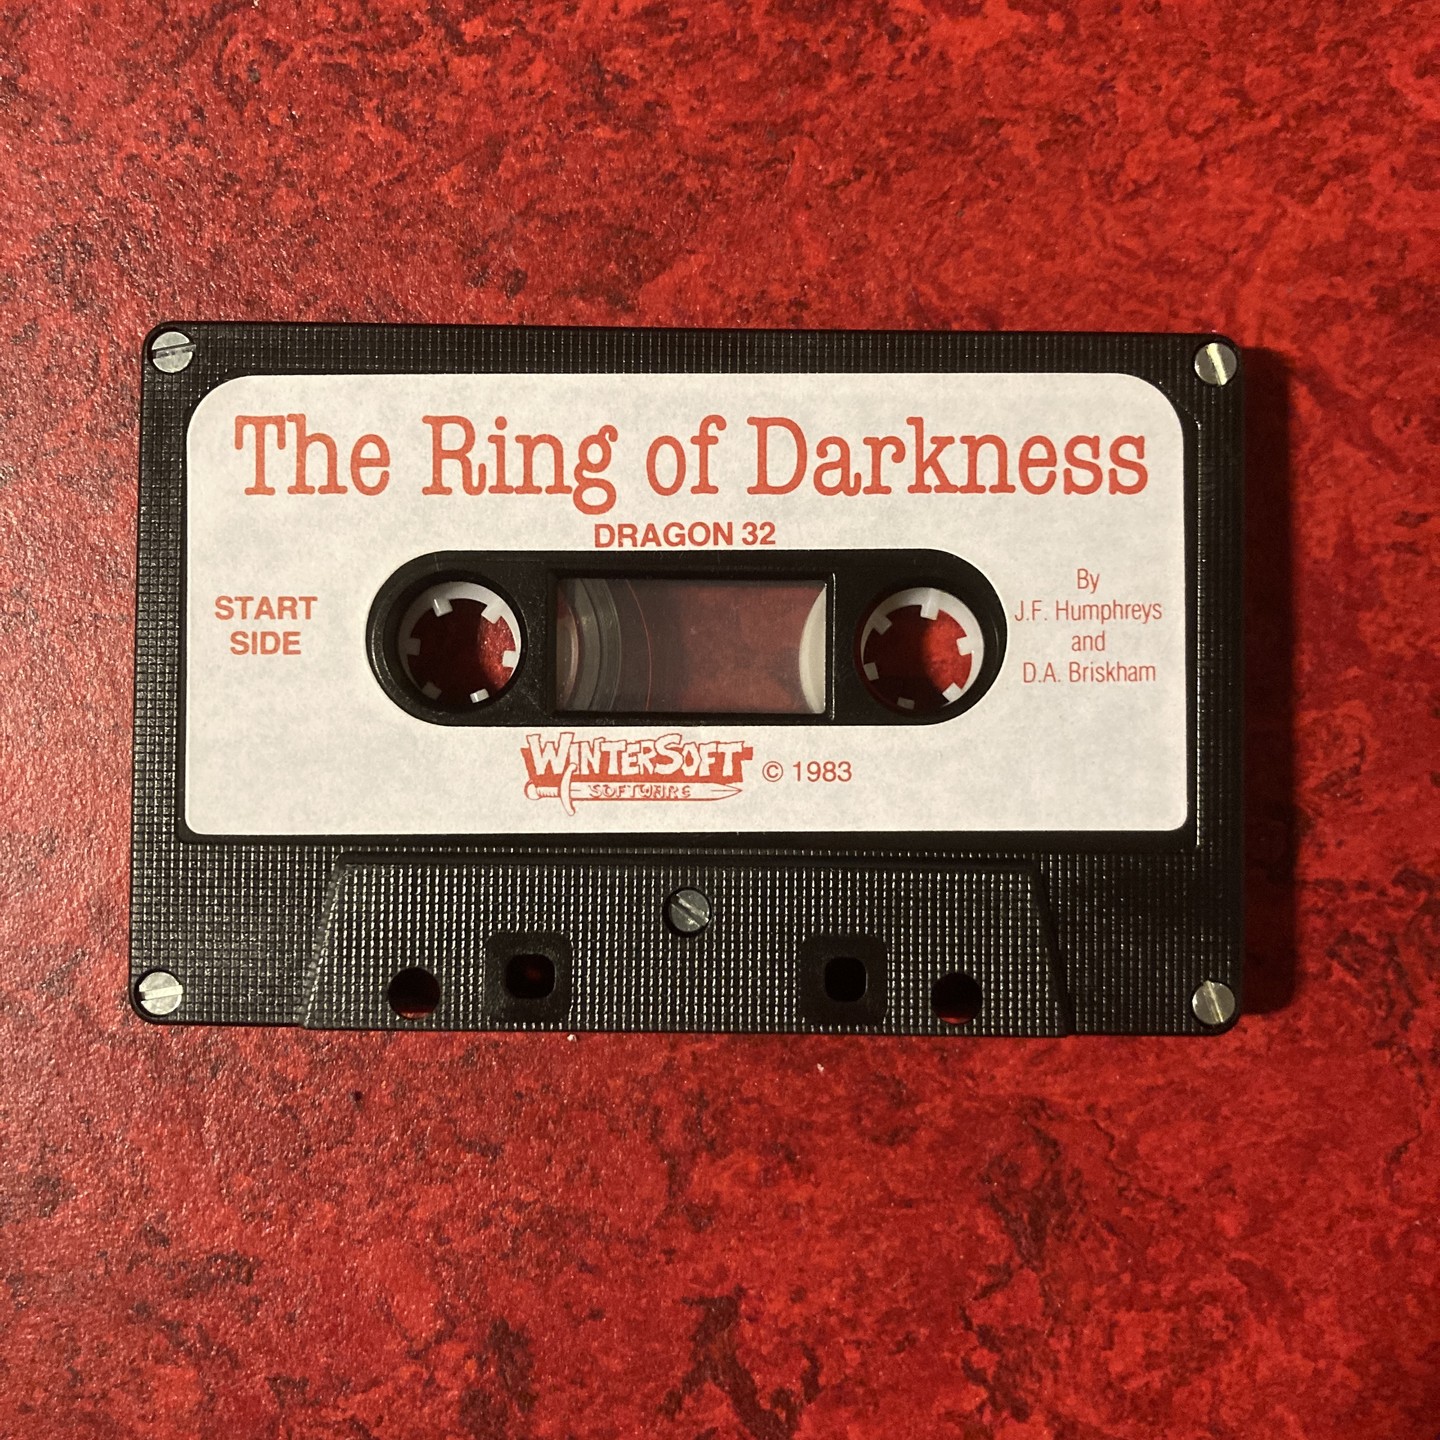 The Ring of Darkness - Dragon 32